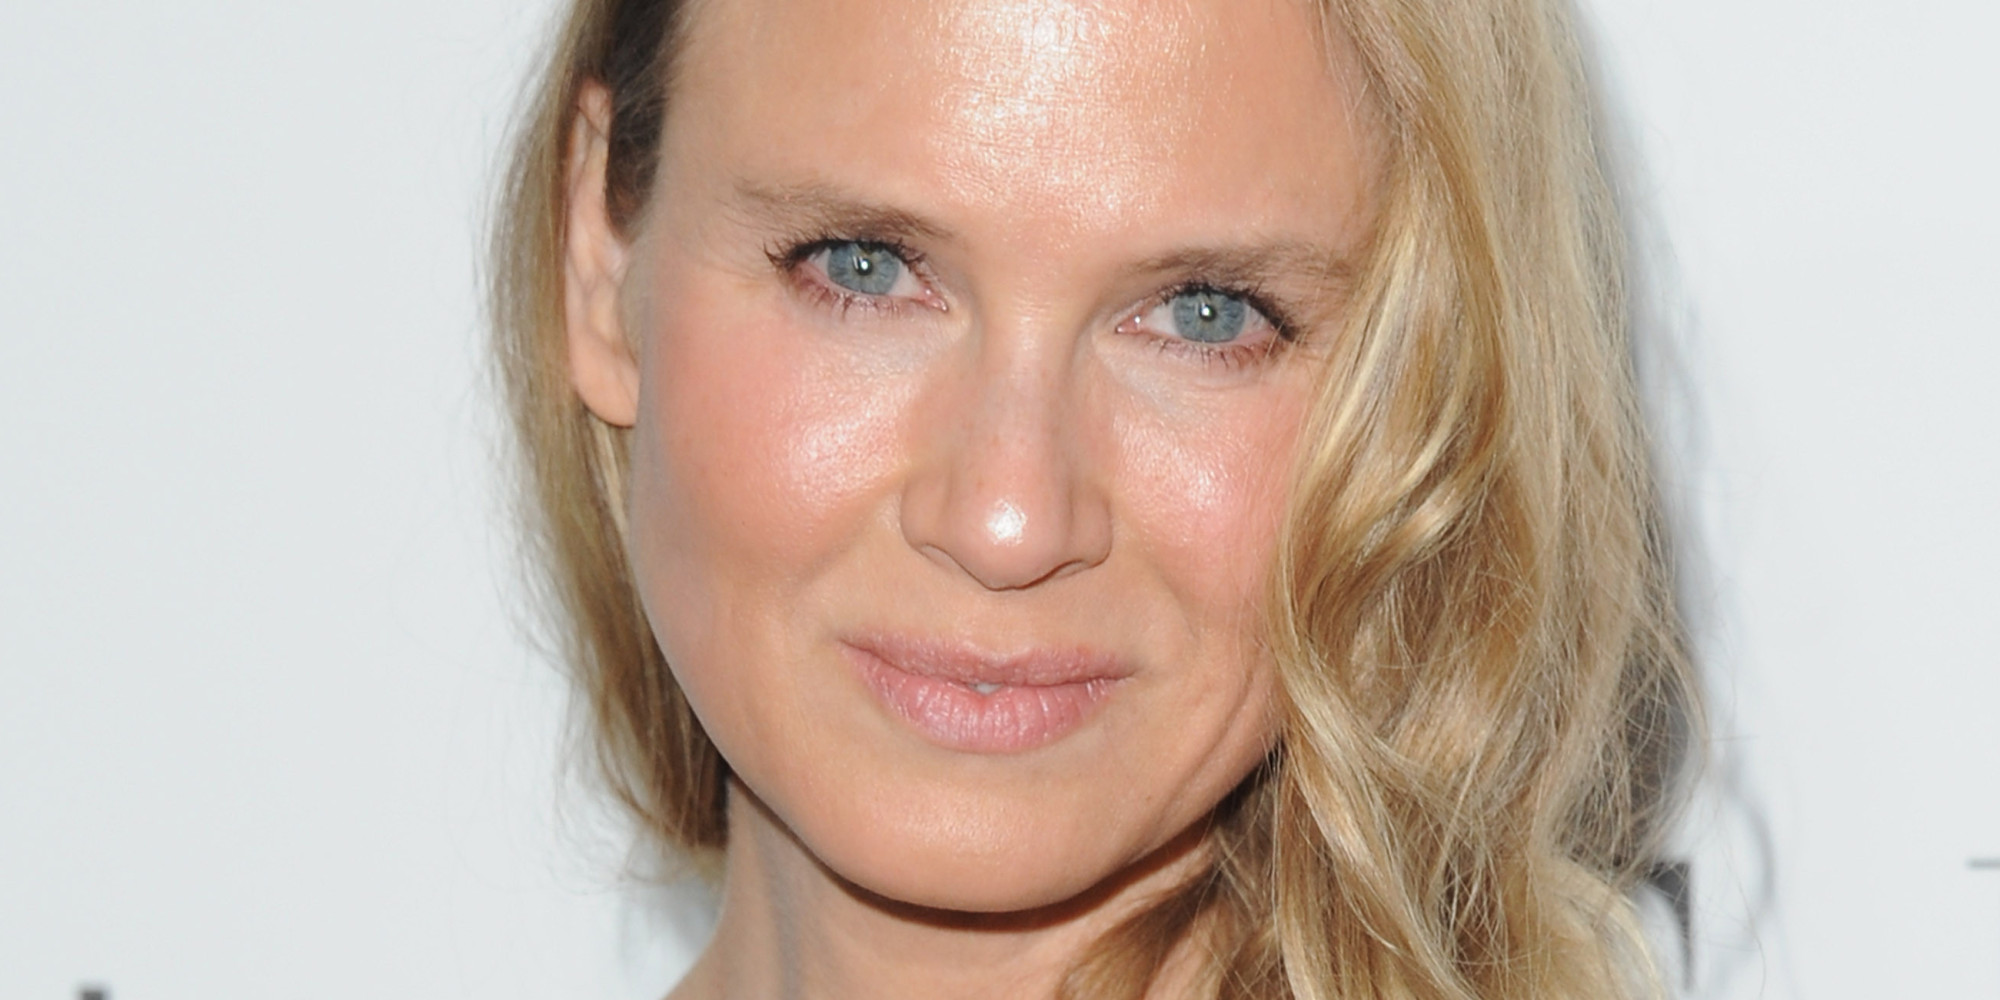 Renee Zellweger Speaks Out: 'I'm Glad Folks Think I Look Different' | HuffPost2000 x 1000